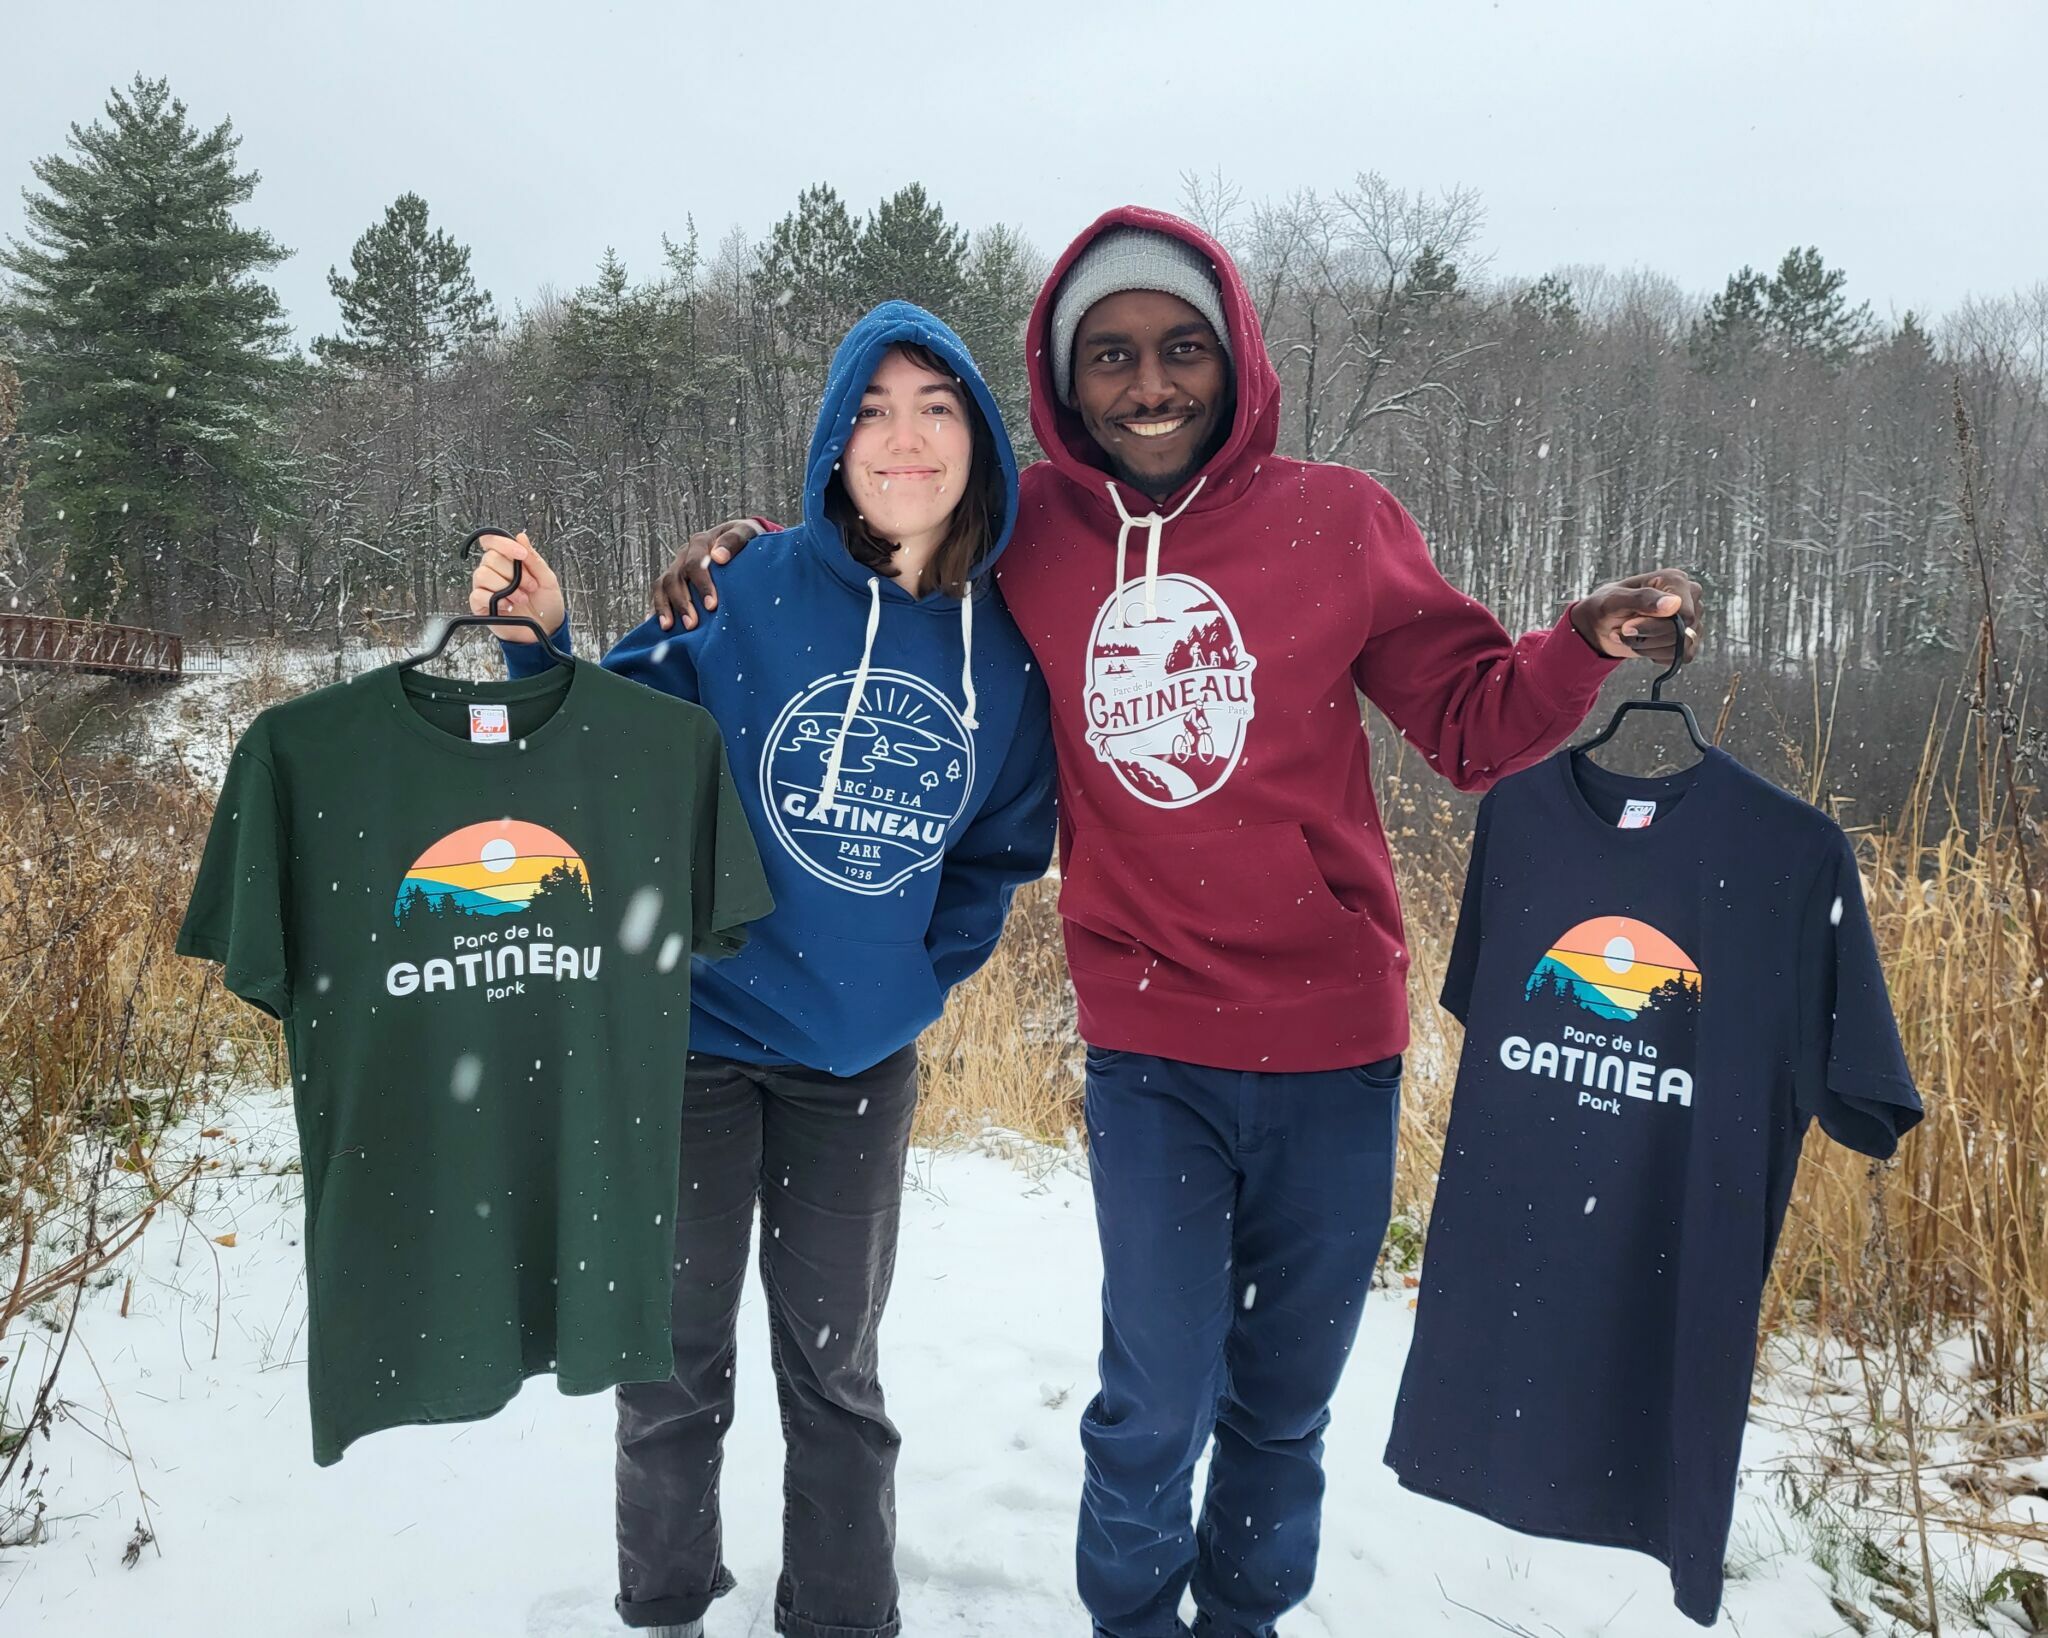 Two people outside in a snowy landscape wearing Gatineau Park clothing and each holding a hanger with Gatineau Park t-shirts.